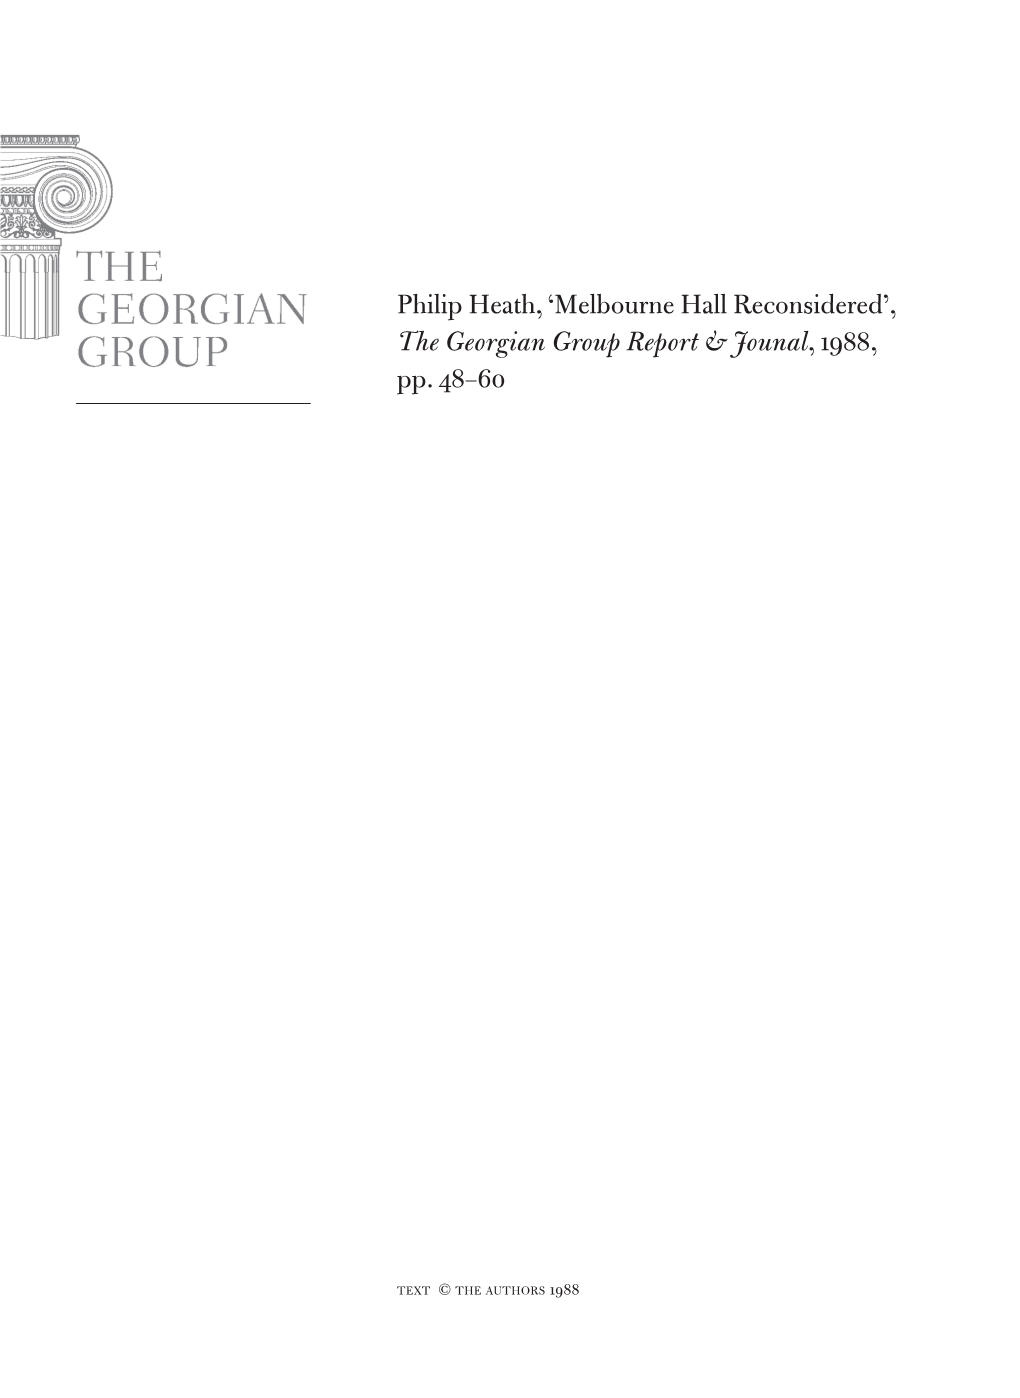 Melbourne Hall Reconsidered’, the Georgian Group Report & Jounal, 1988, Pp